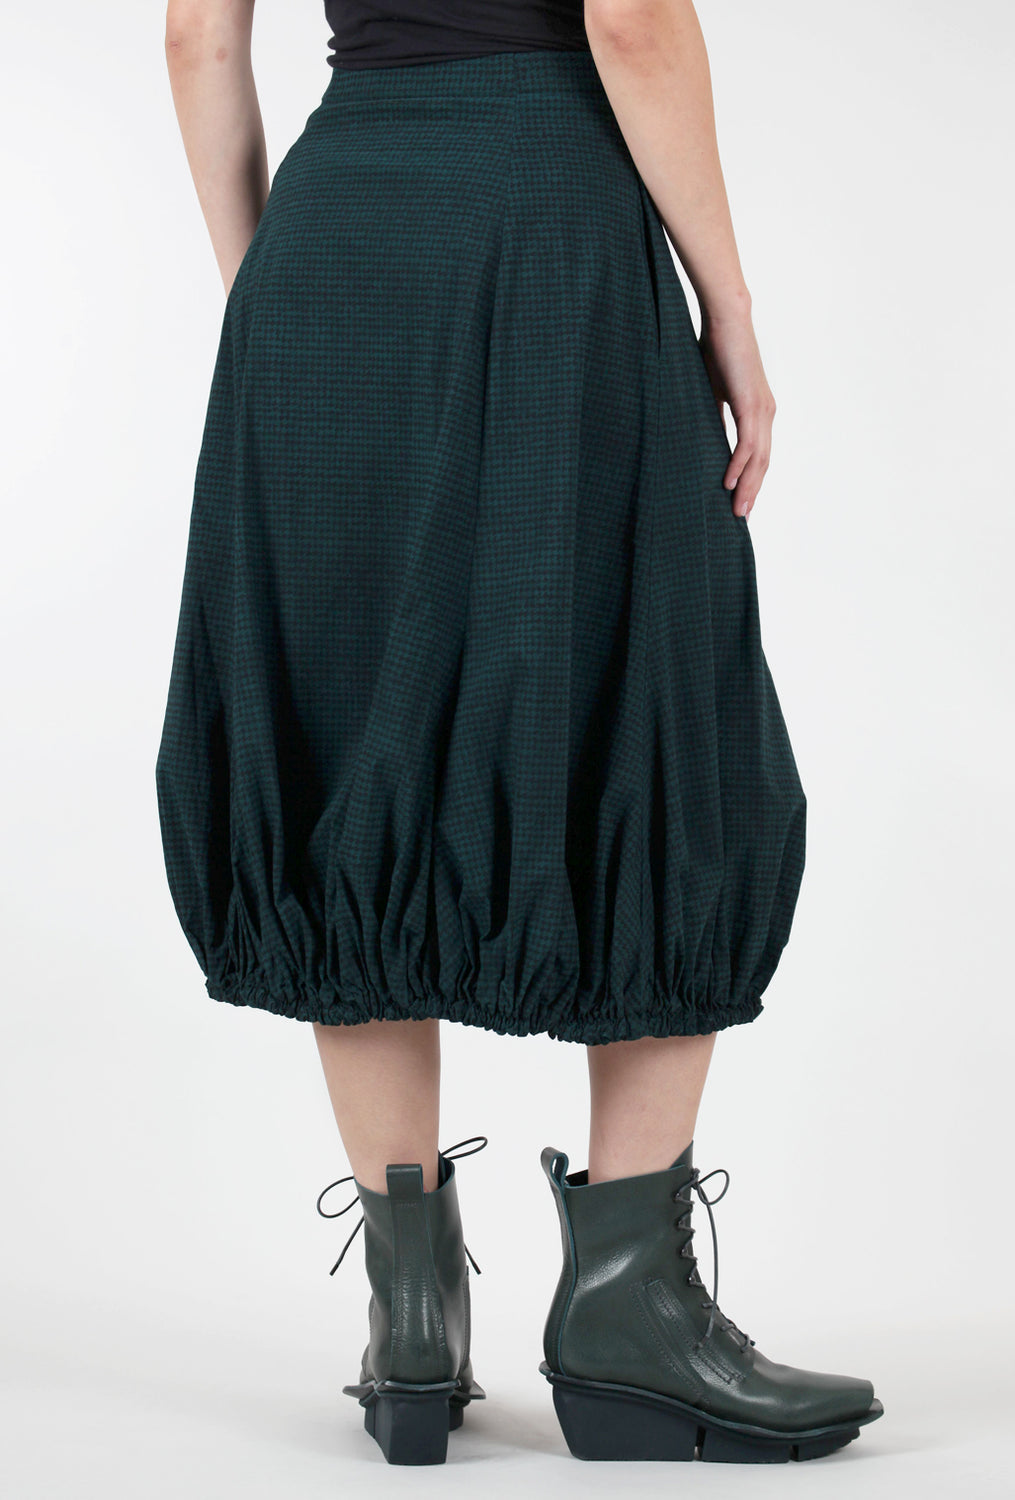 Rundholz Sig Stretch Bubble Skirt, Forest Check 